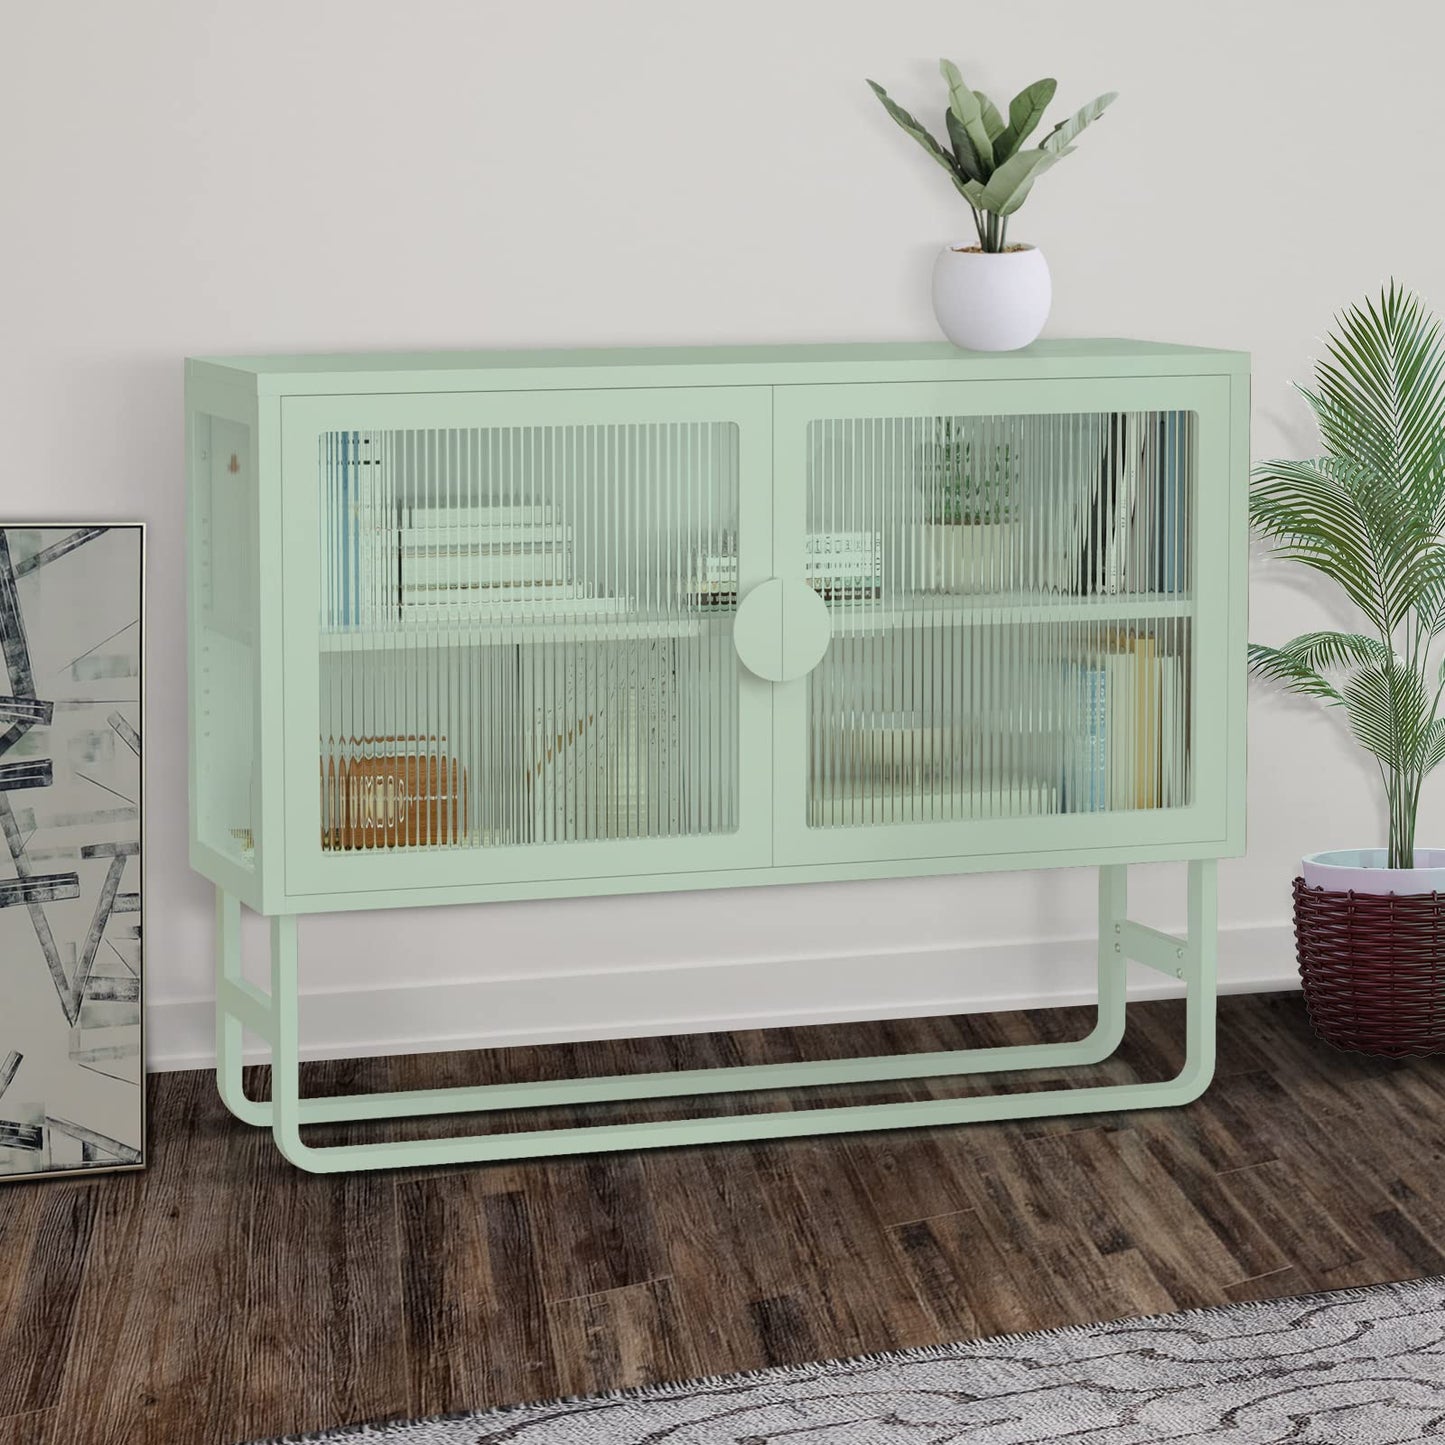 Maotifeys Metal Storage Cabinet Glass Display Cabinet with 2 Doors and Adjustable Shelf, Modern Green 47" Wide Glass Bookcase Free Standing Home